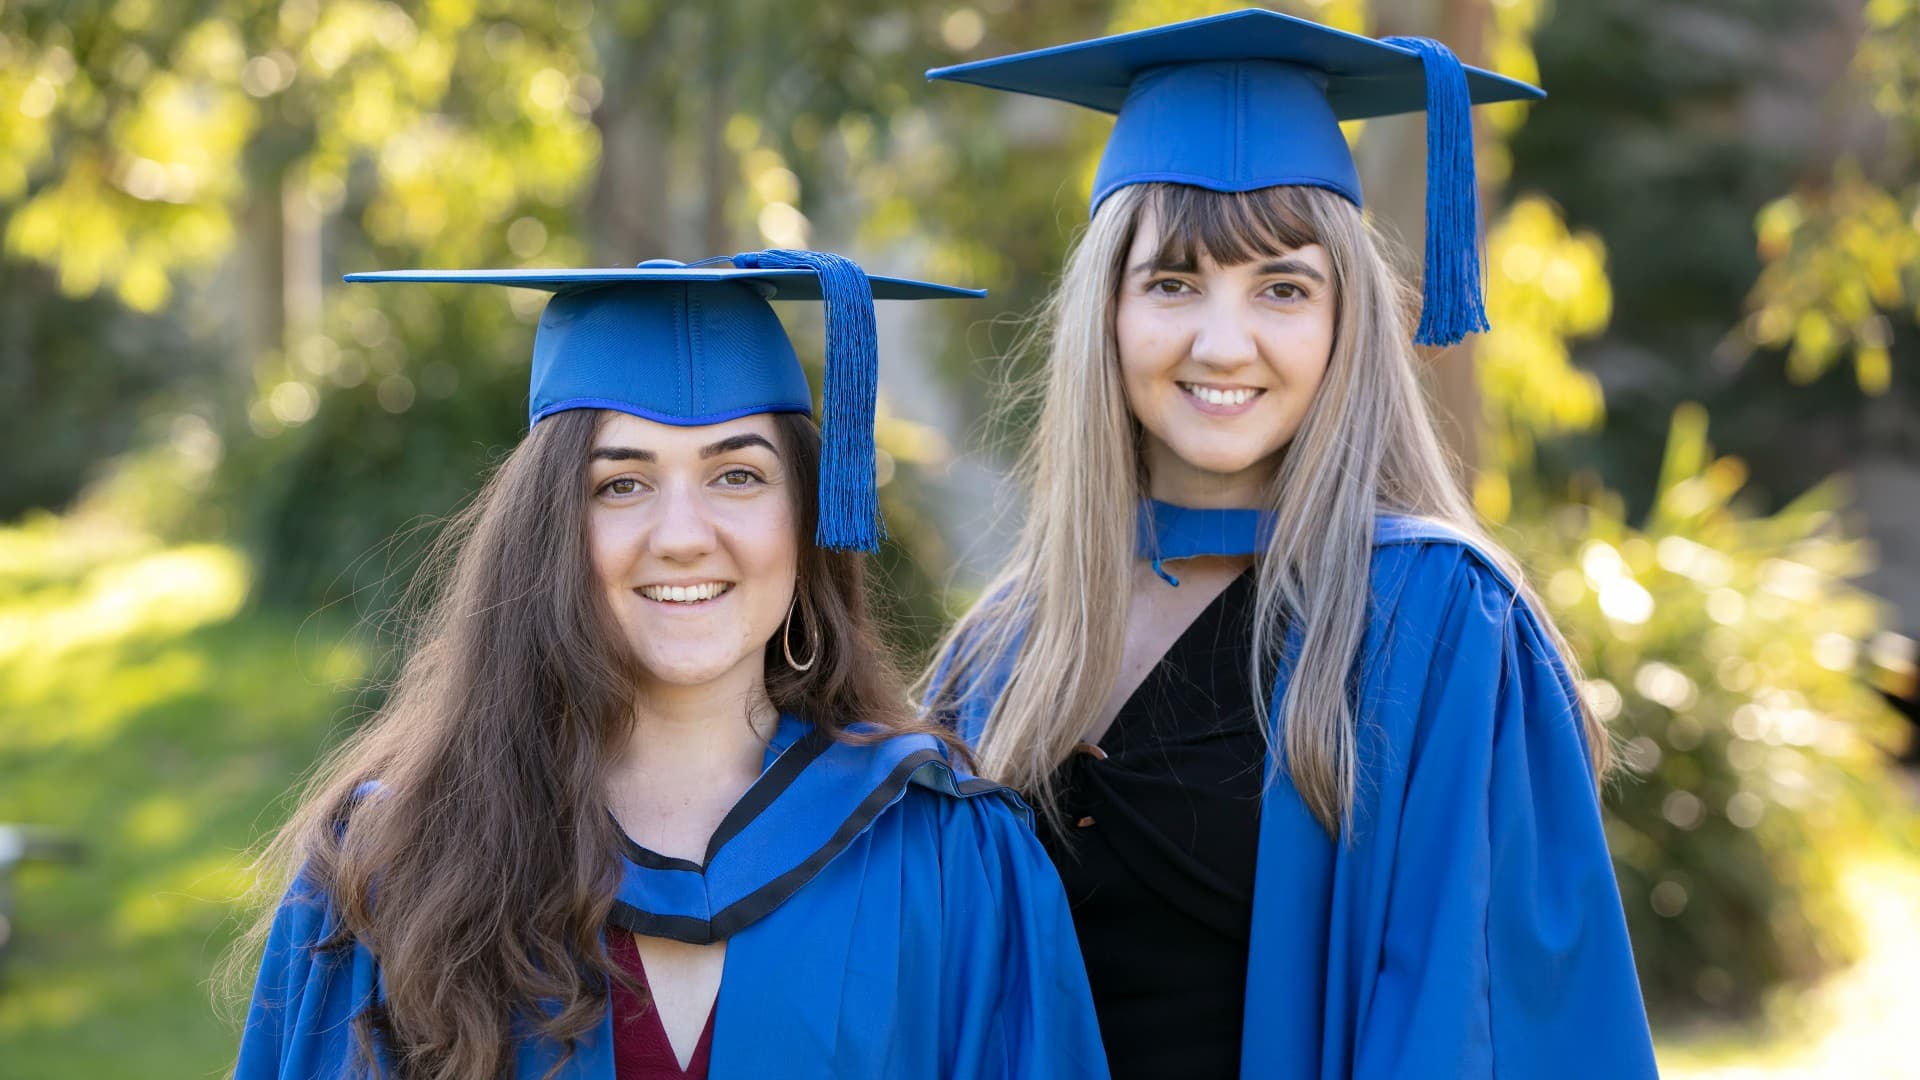 Brenna and Bronte Petrolo, pictured in their graduation gowns. Photo: Mark Newsham